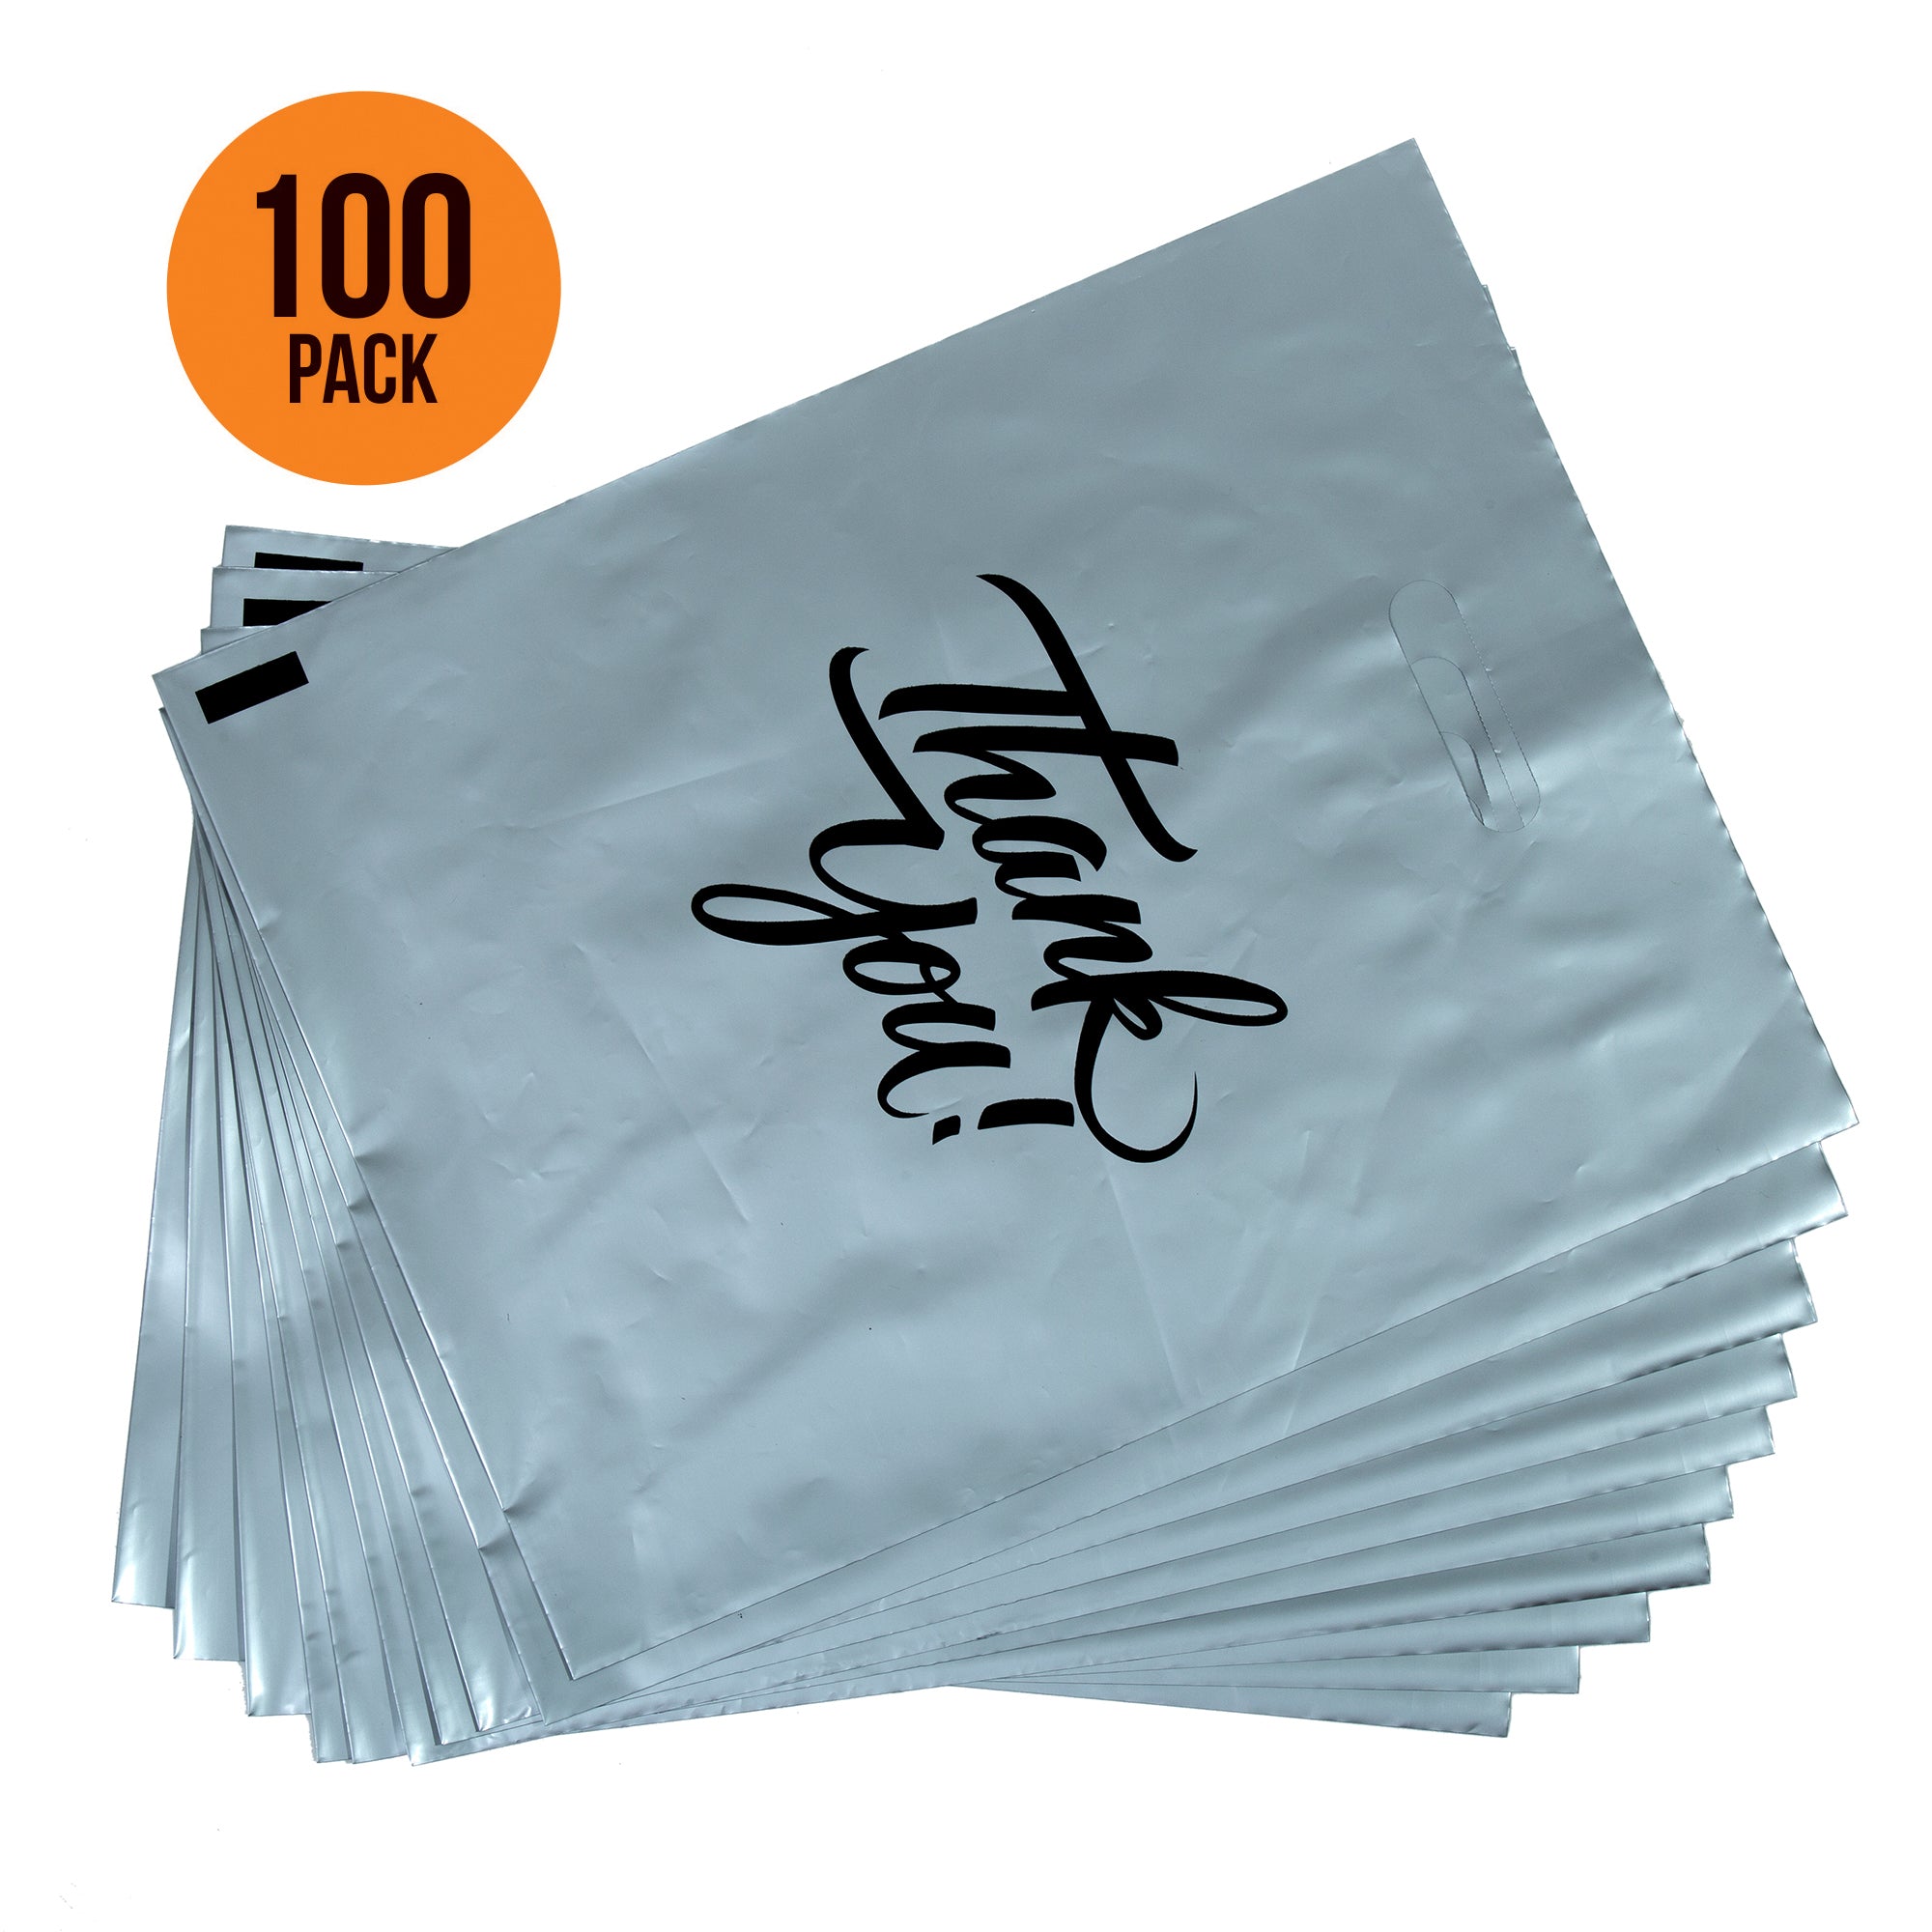 12 x 15 pack of 100 white thank you bags